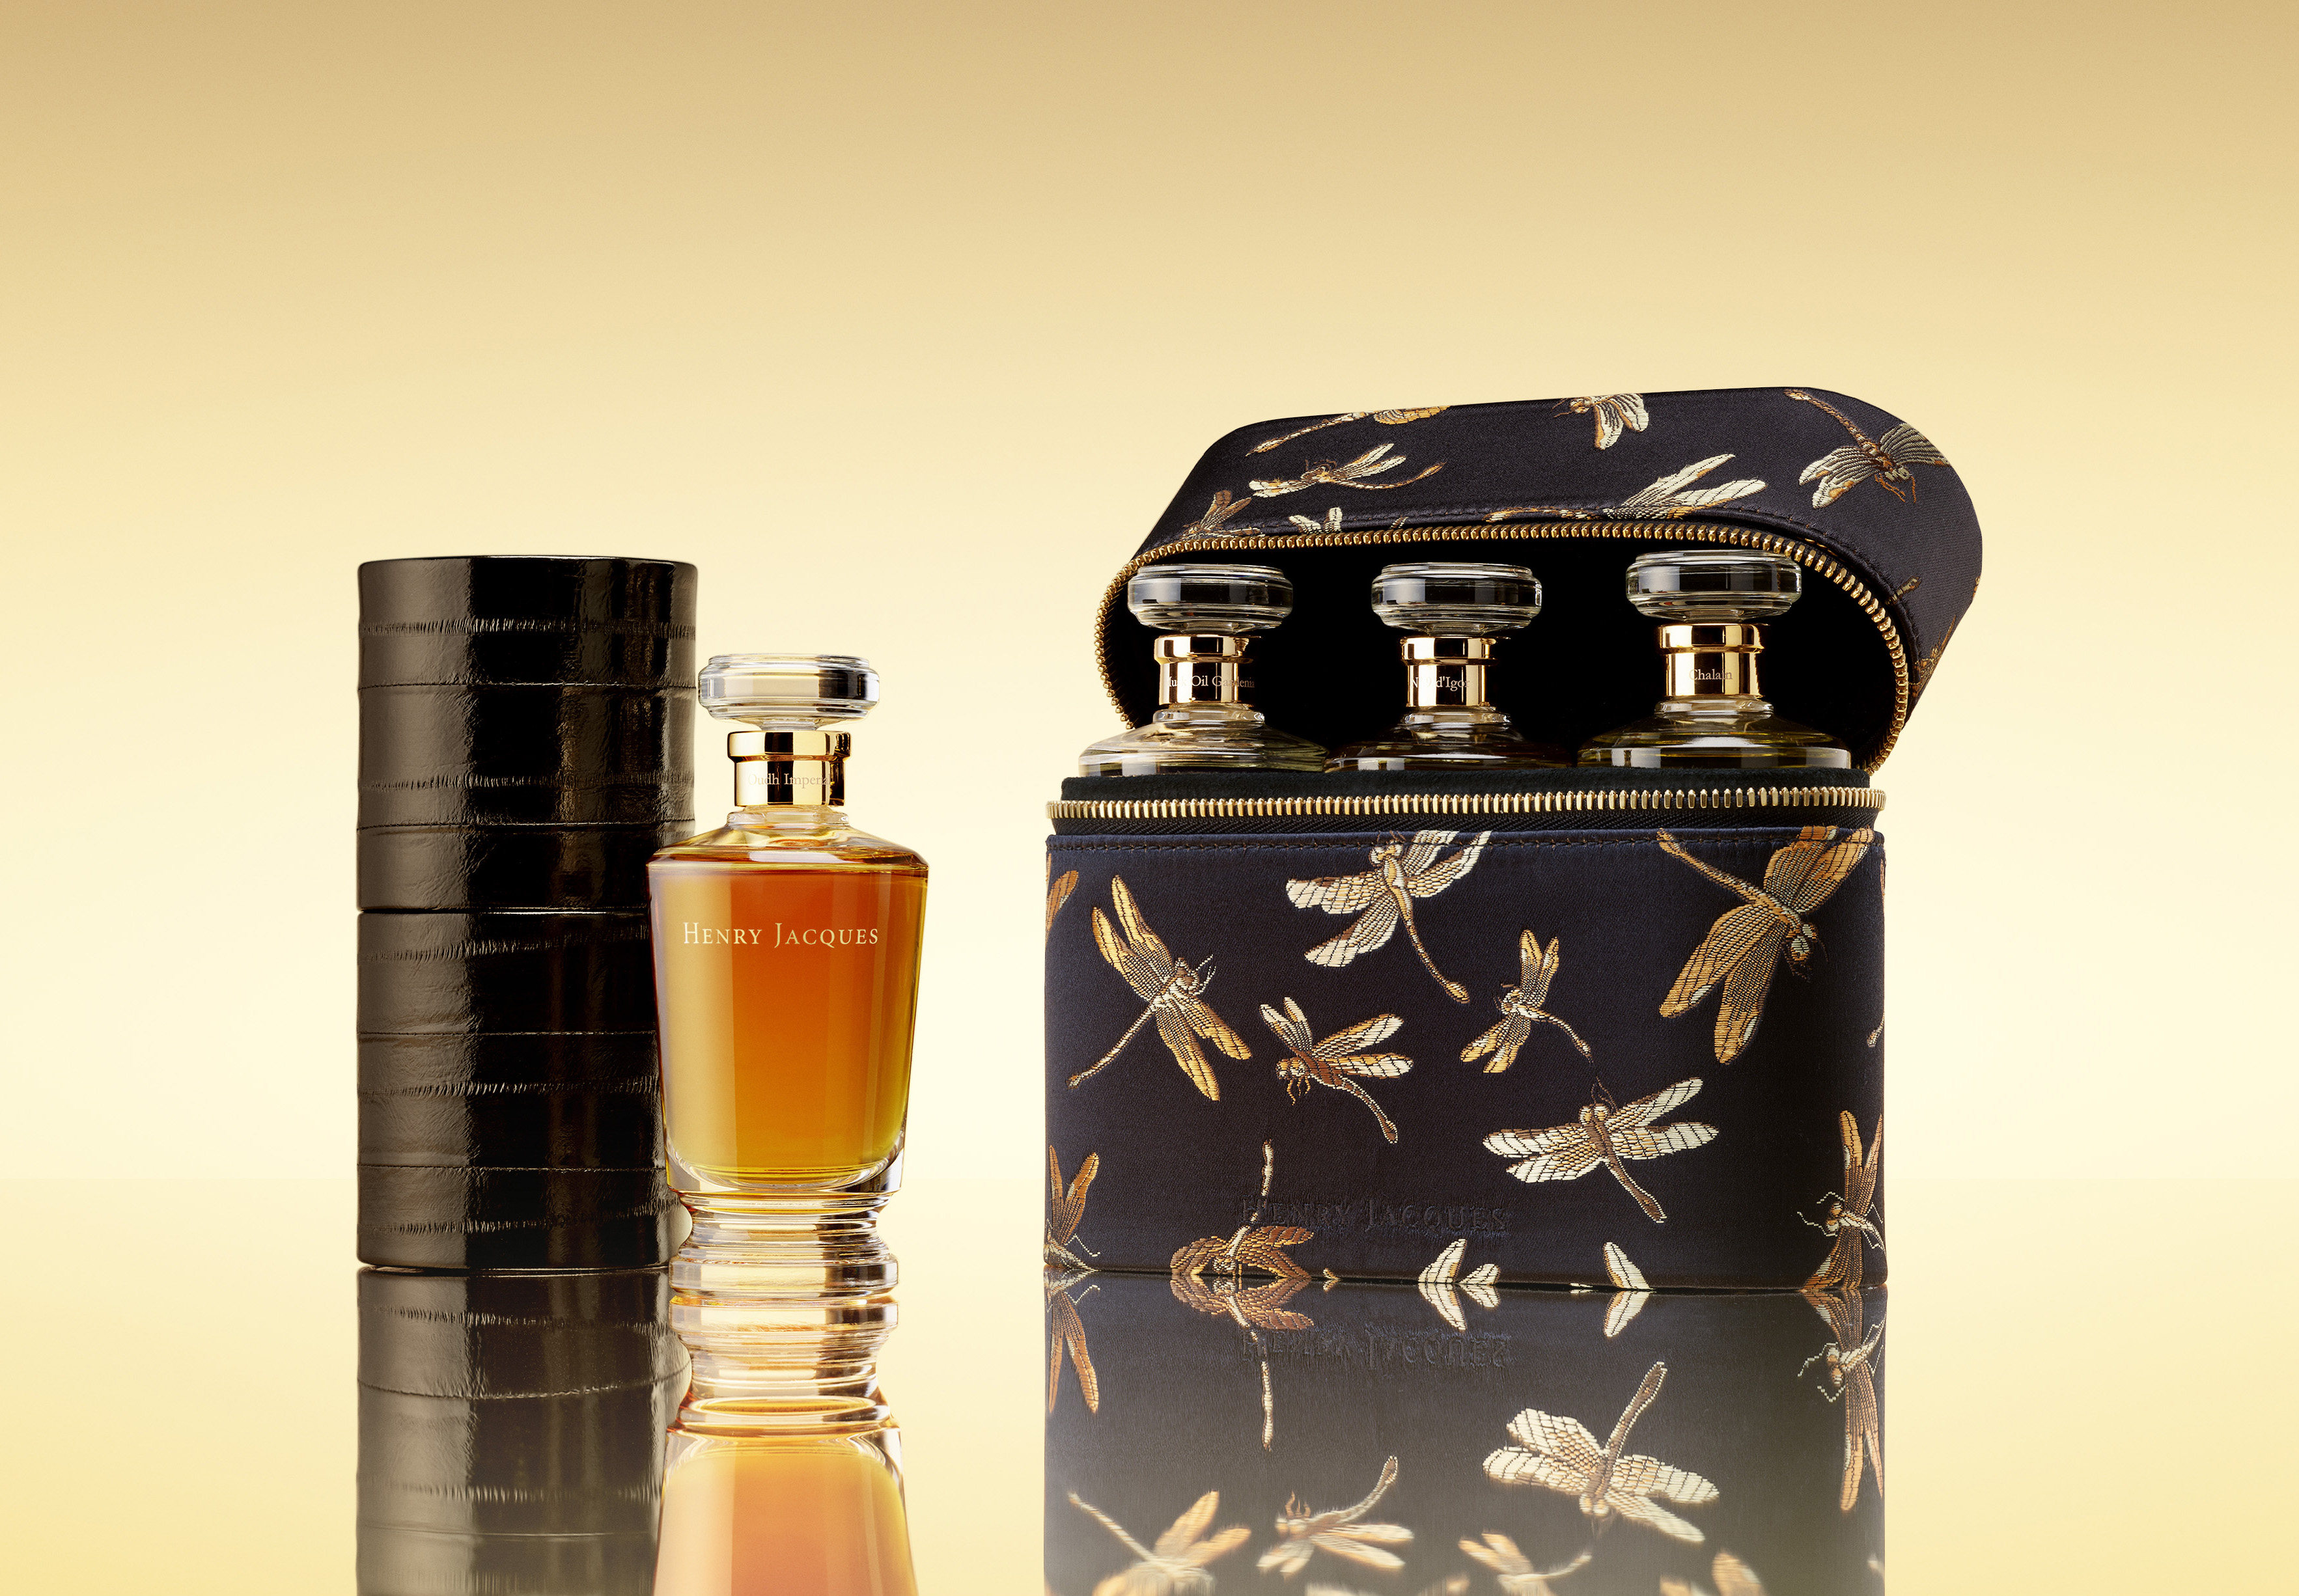 Henry Jacques introduces the HJ Voyage collection of travel cases, to carry up to three flacons of perfume each. Photo: Handout